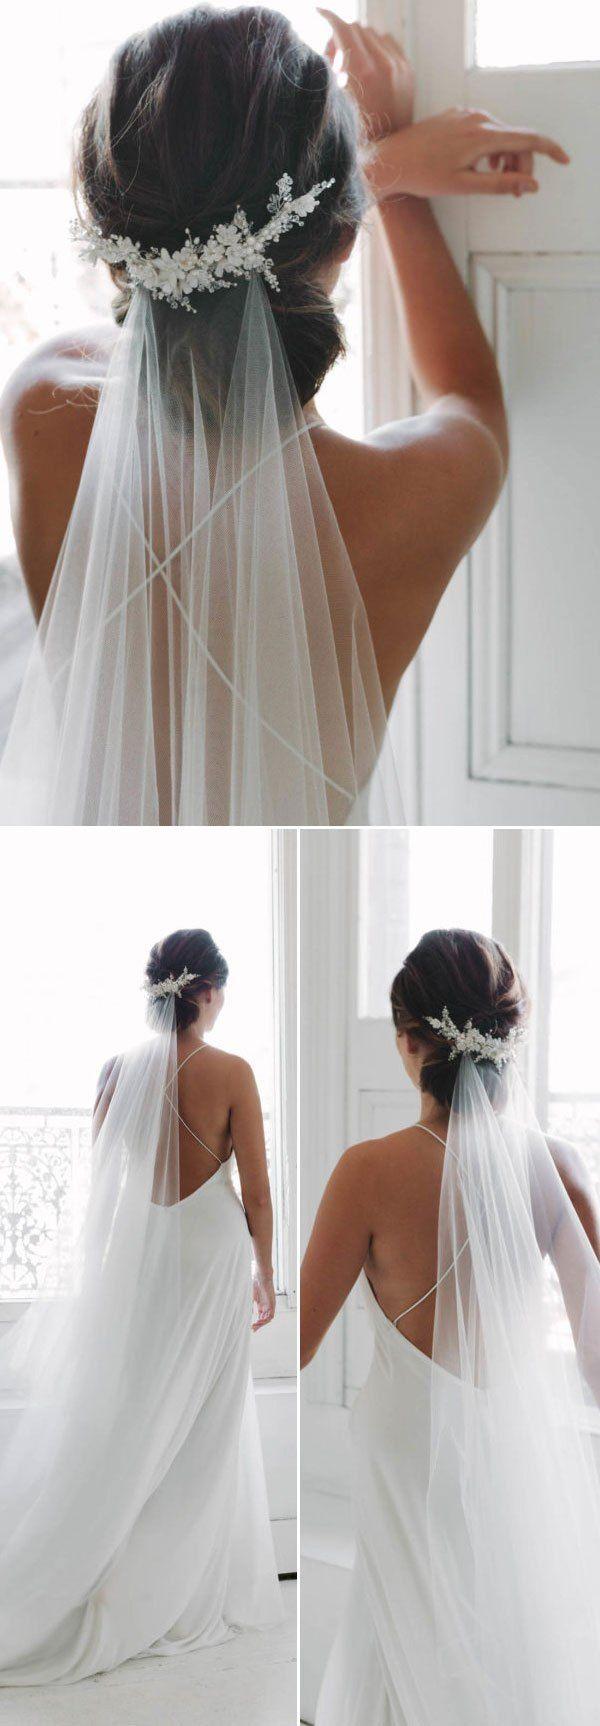 Wedding - Top 20 Wedding Hairstyles With Veils And Accessories